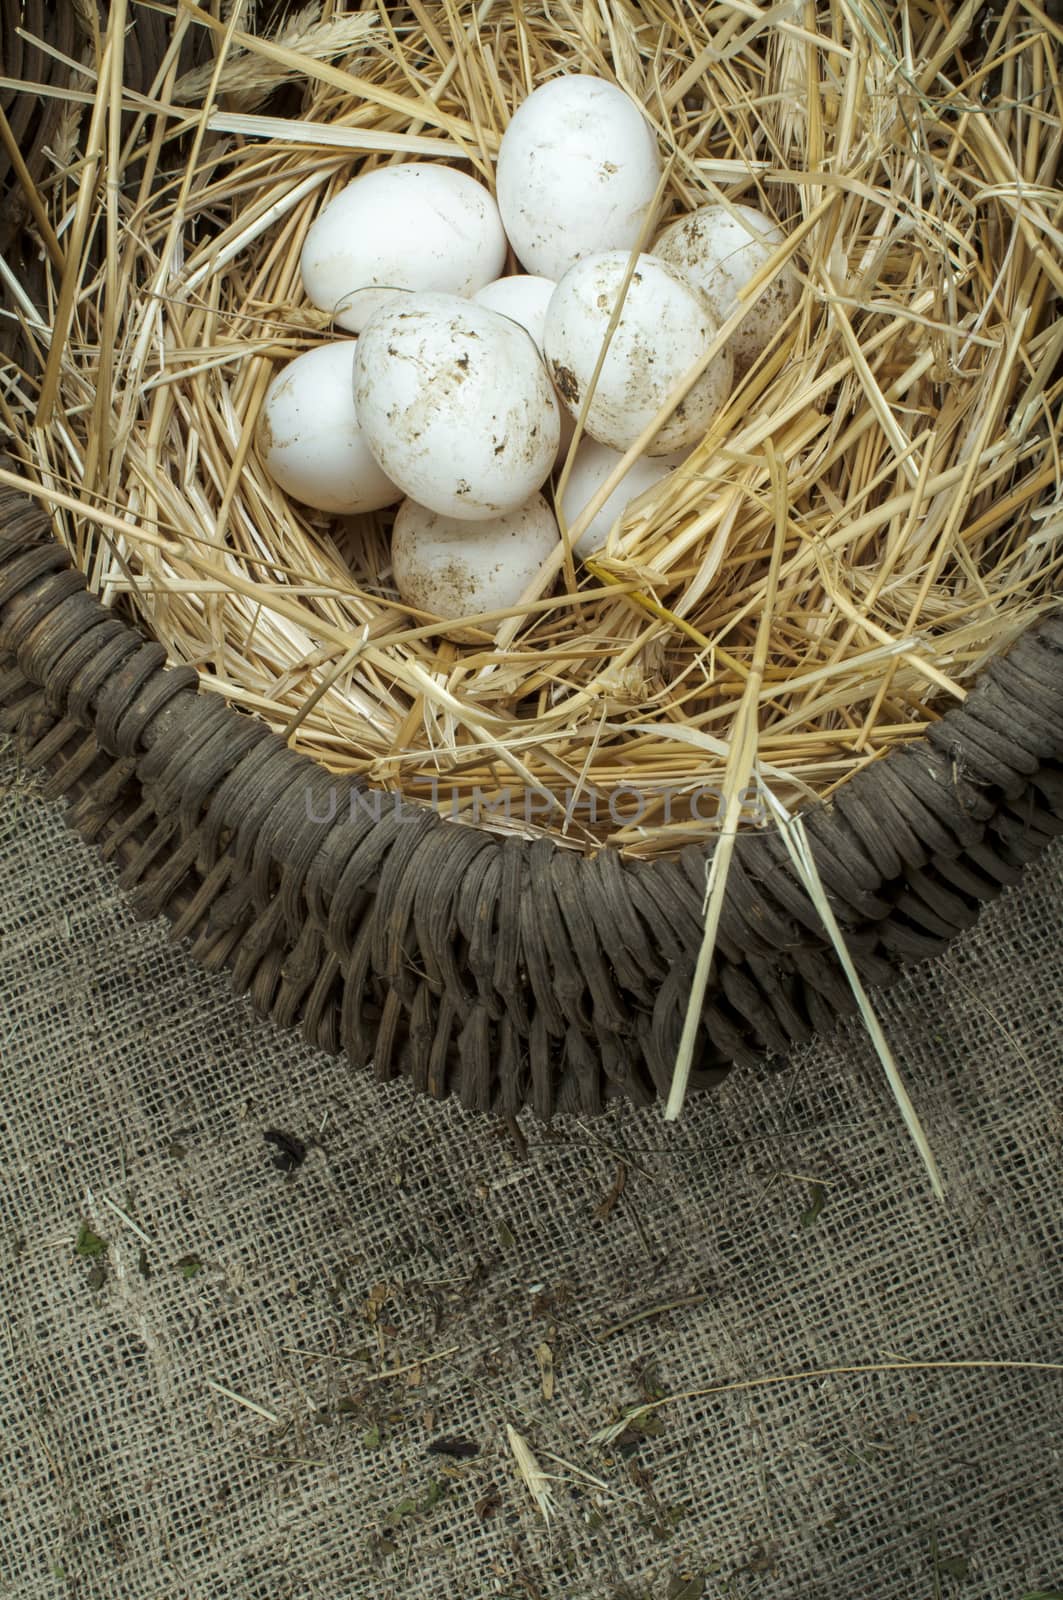 Organic white eggs from domestic farm. Eggs in vintage basket.